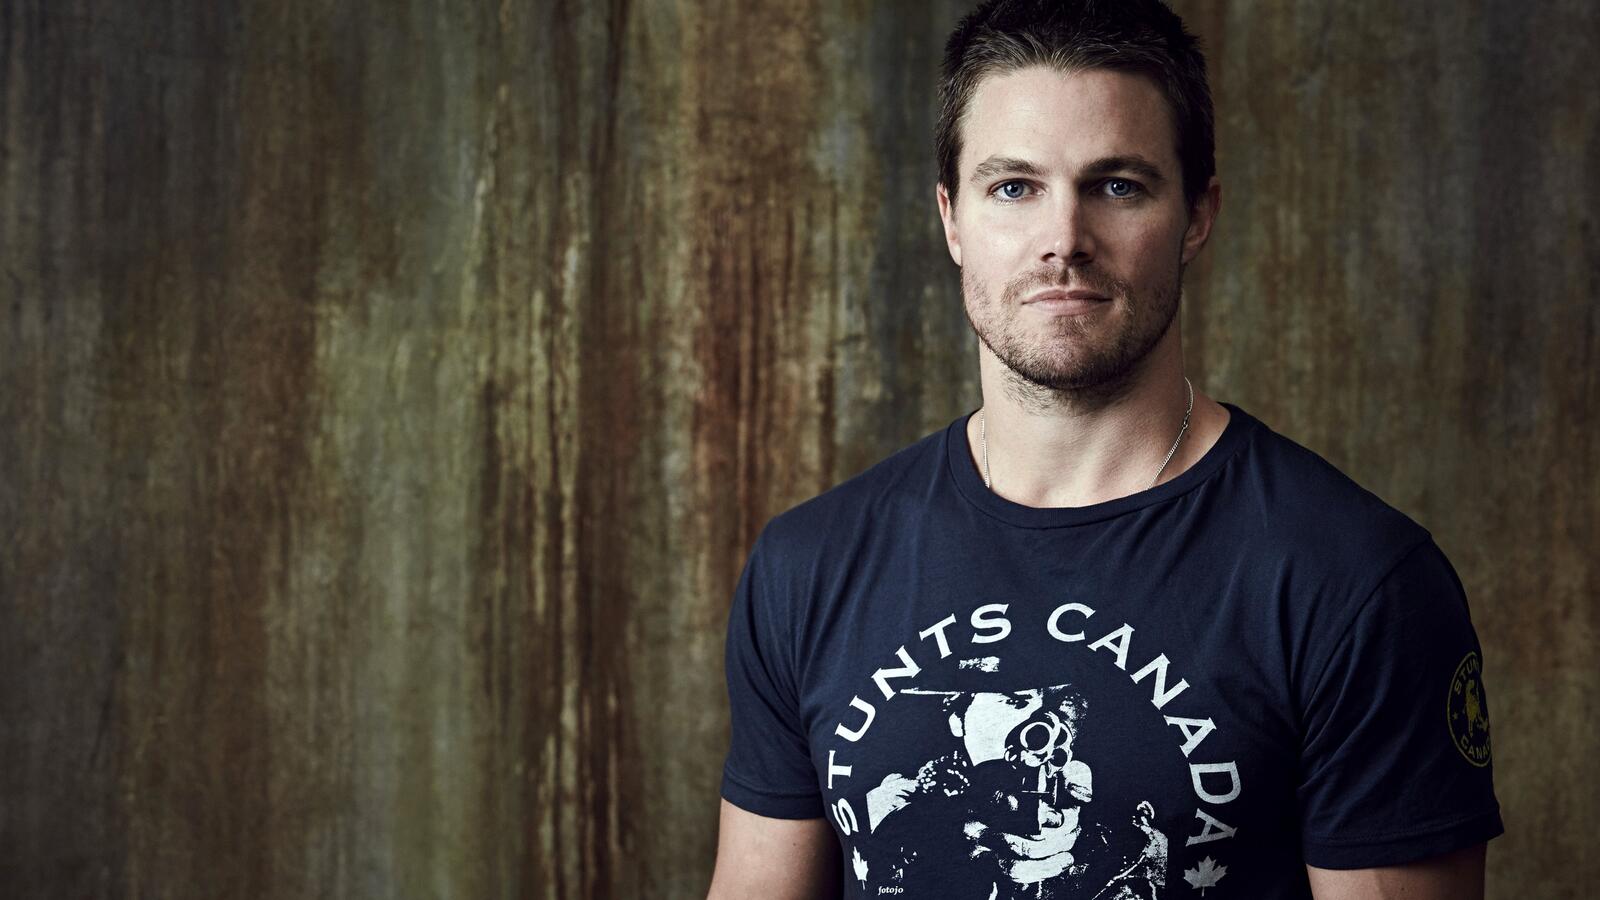 Wallpapers TV show stephen amell shooter on the desktop